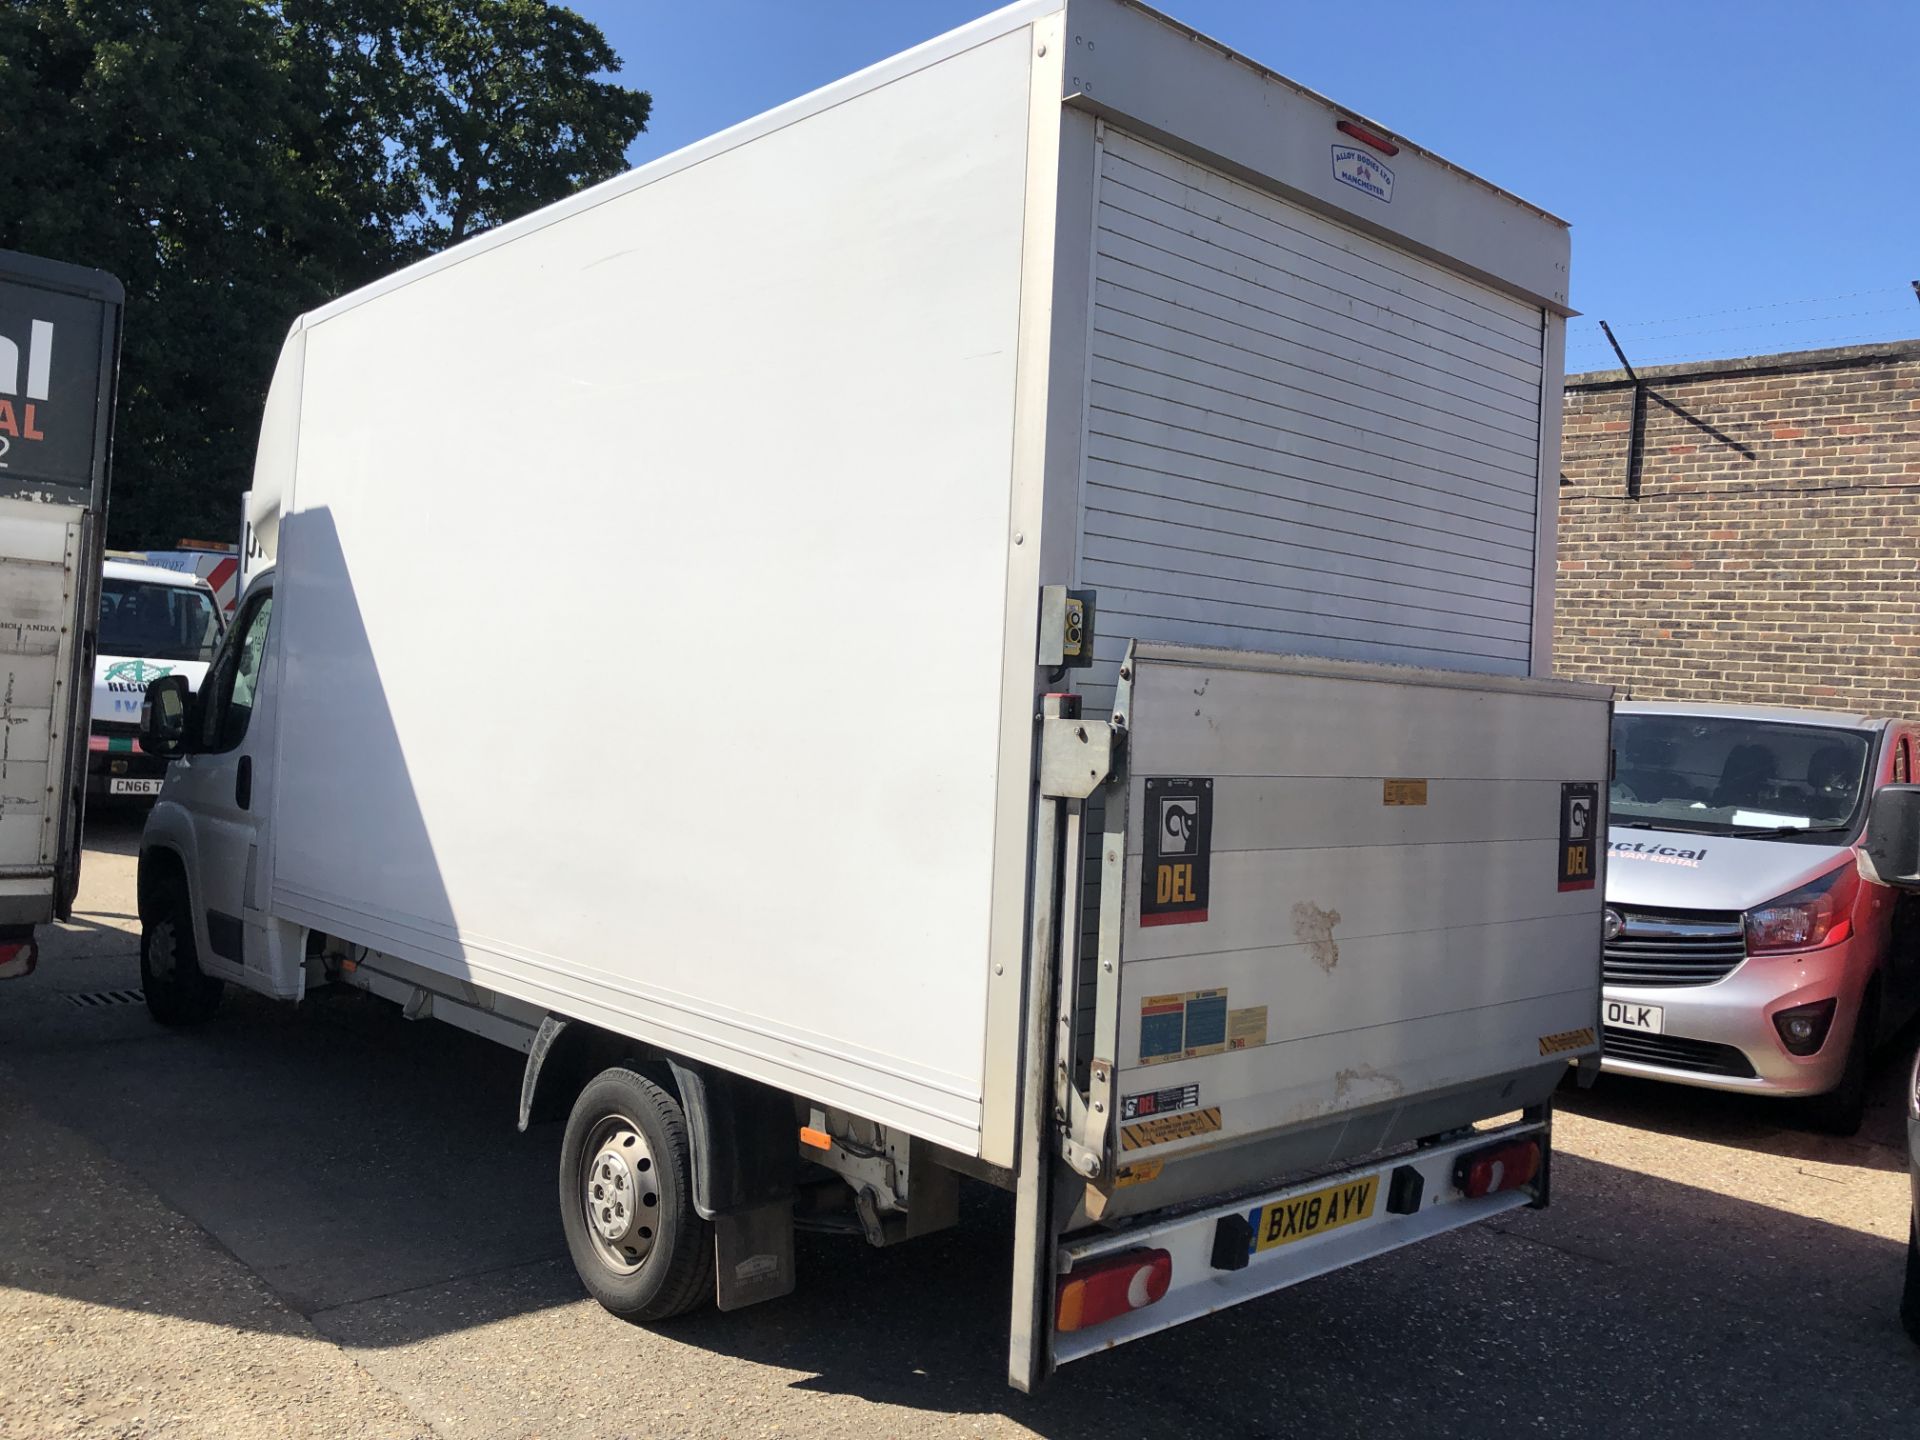 Peugeot Boxer 335 L3 Blue HDI Luton Van with tail lift - Image 5 of 9